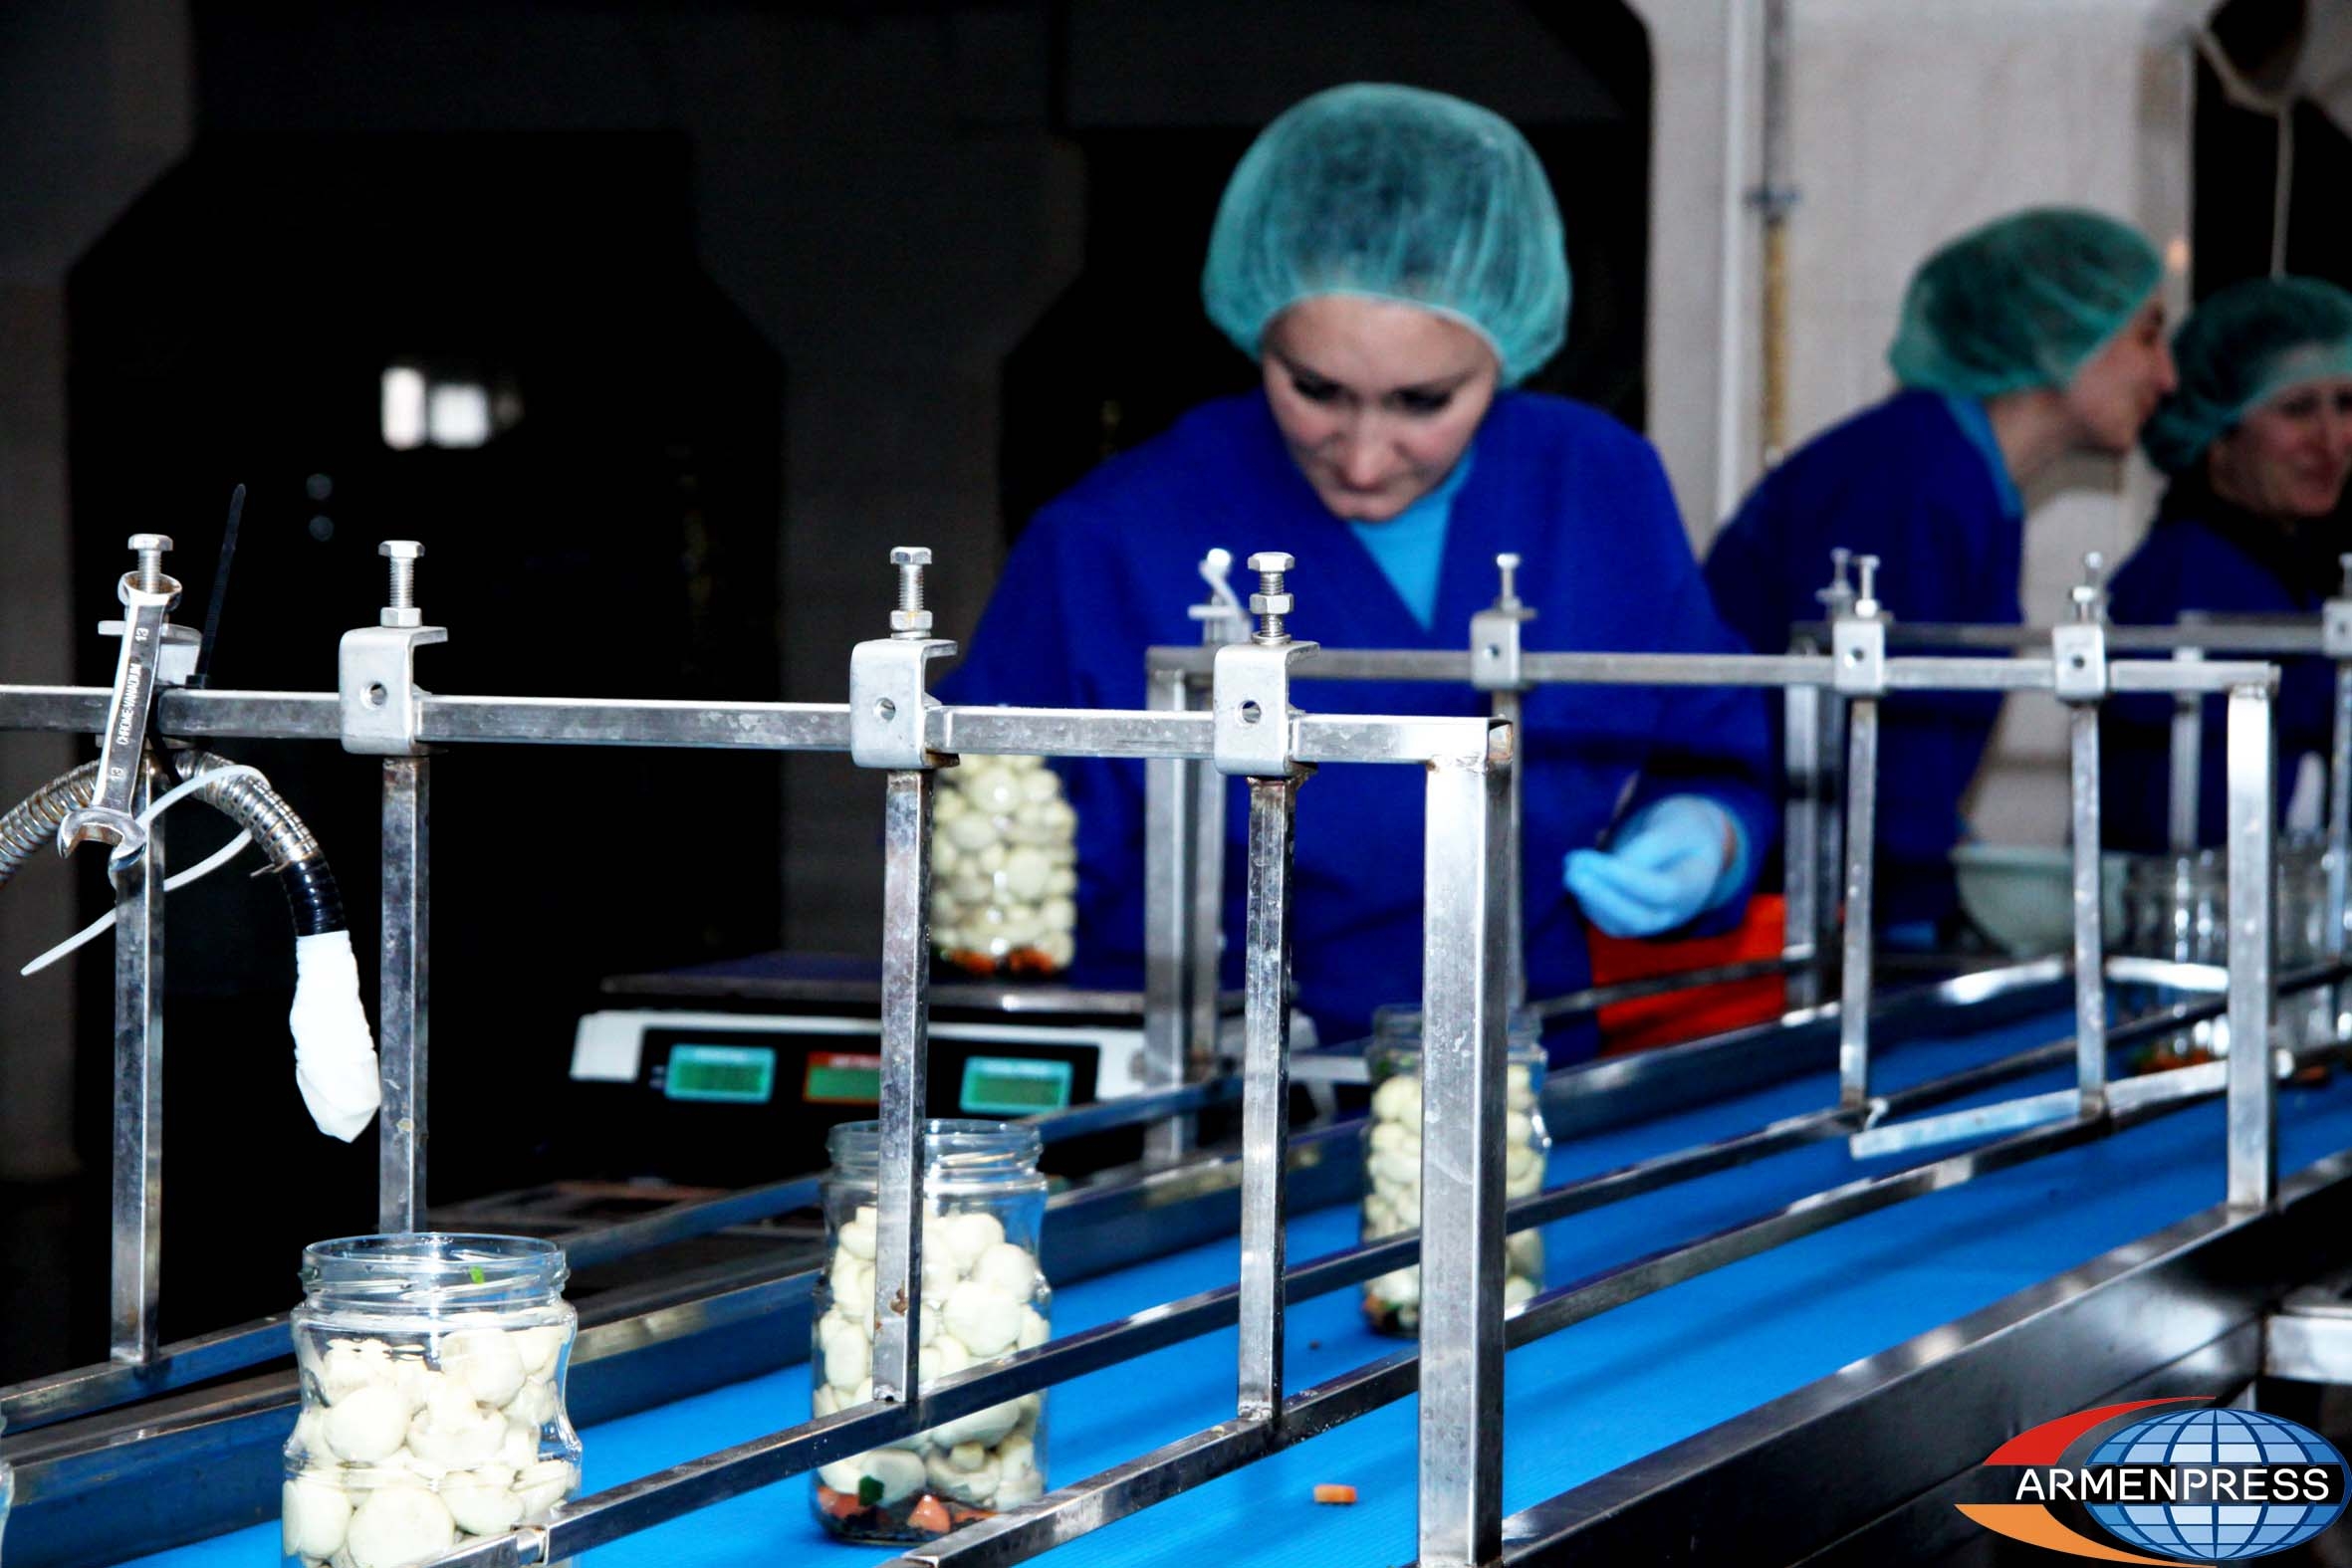 Mushroom producing company offers exclusive cultivation method
